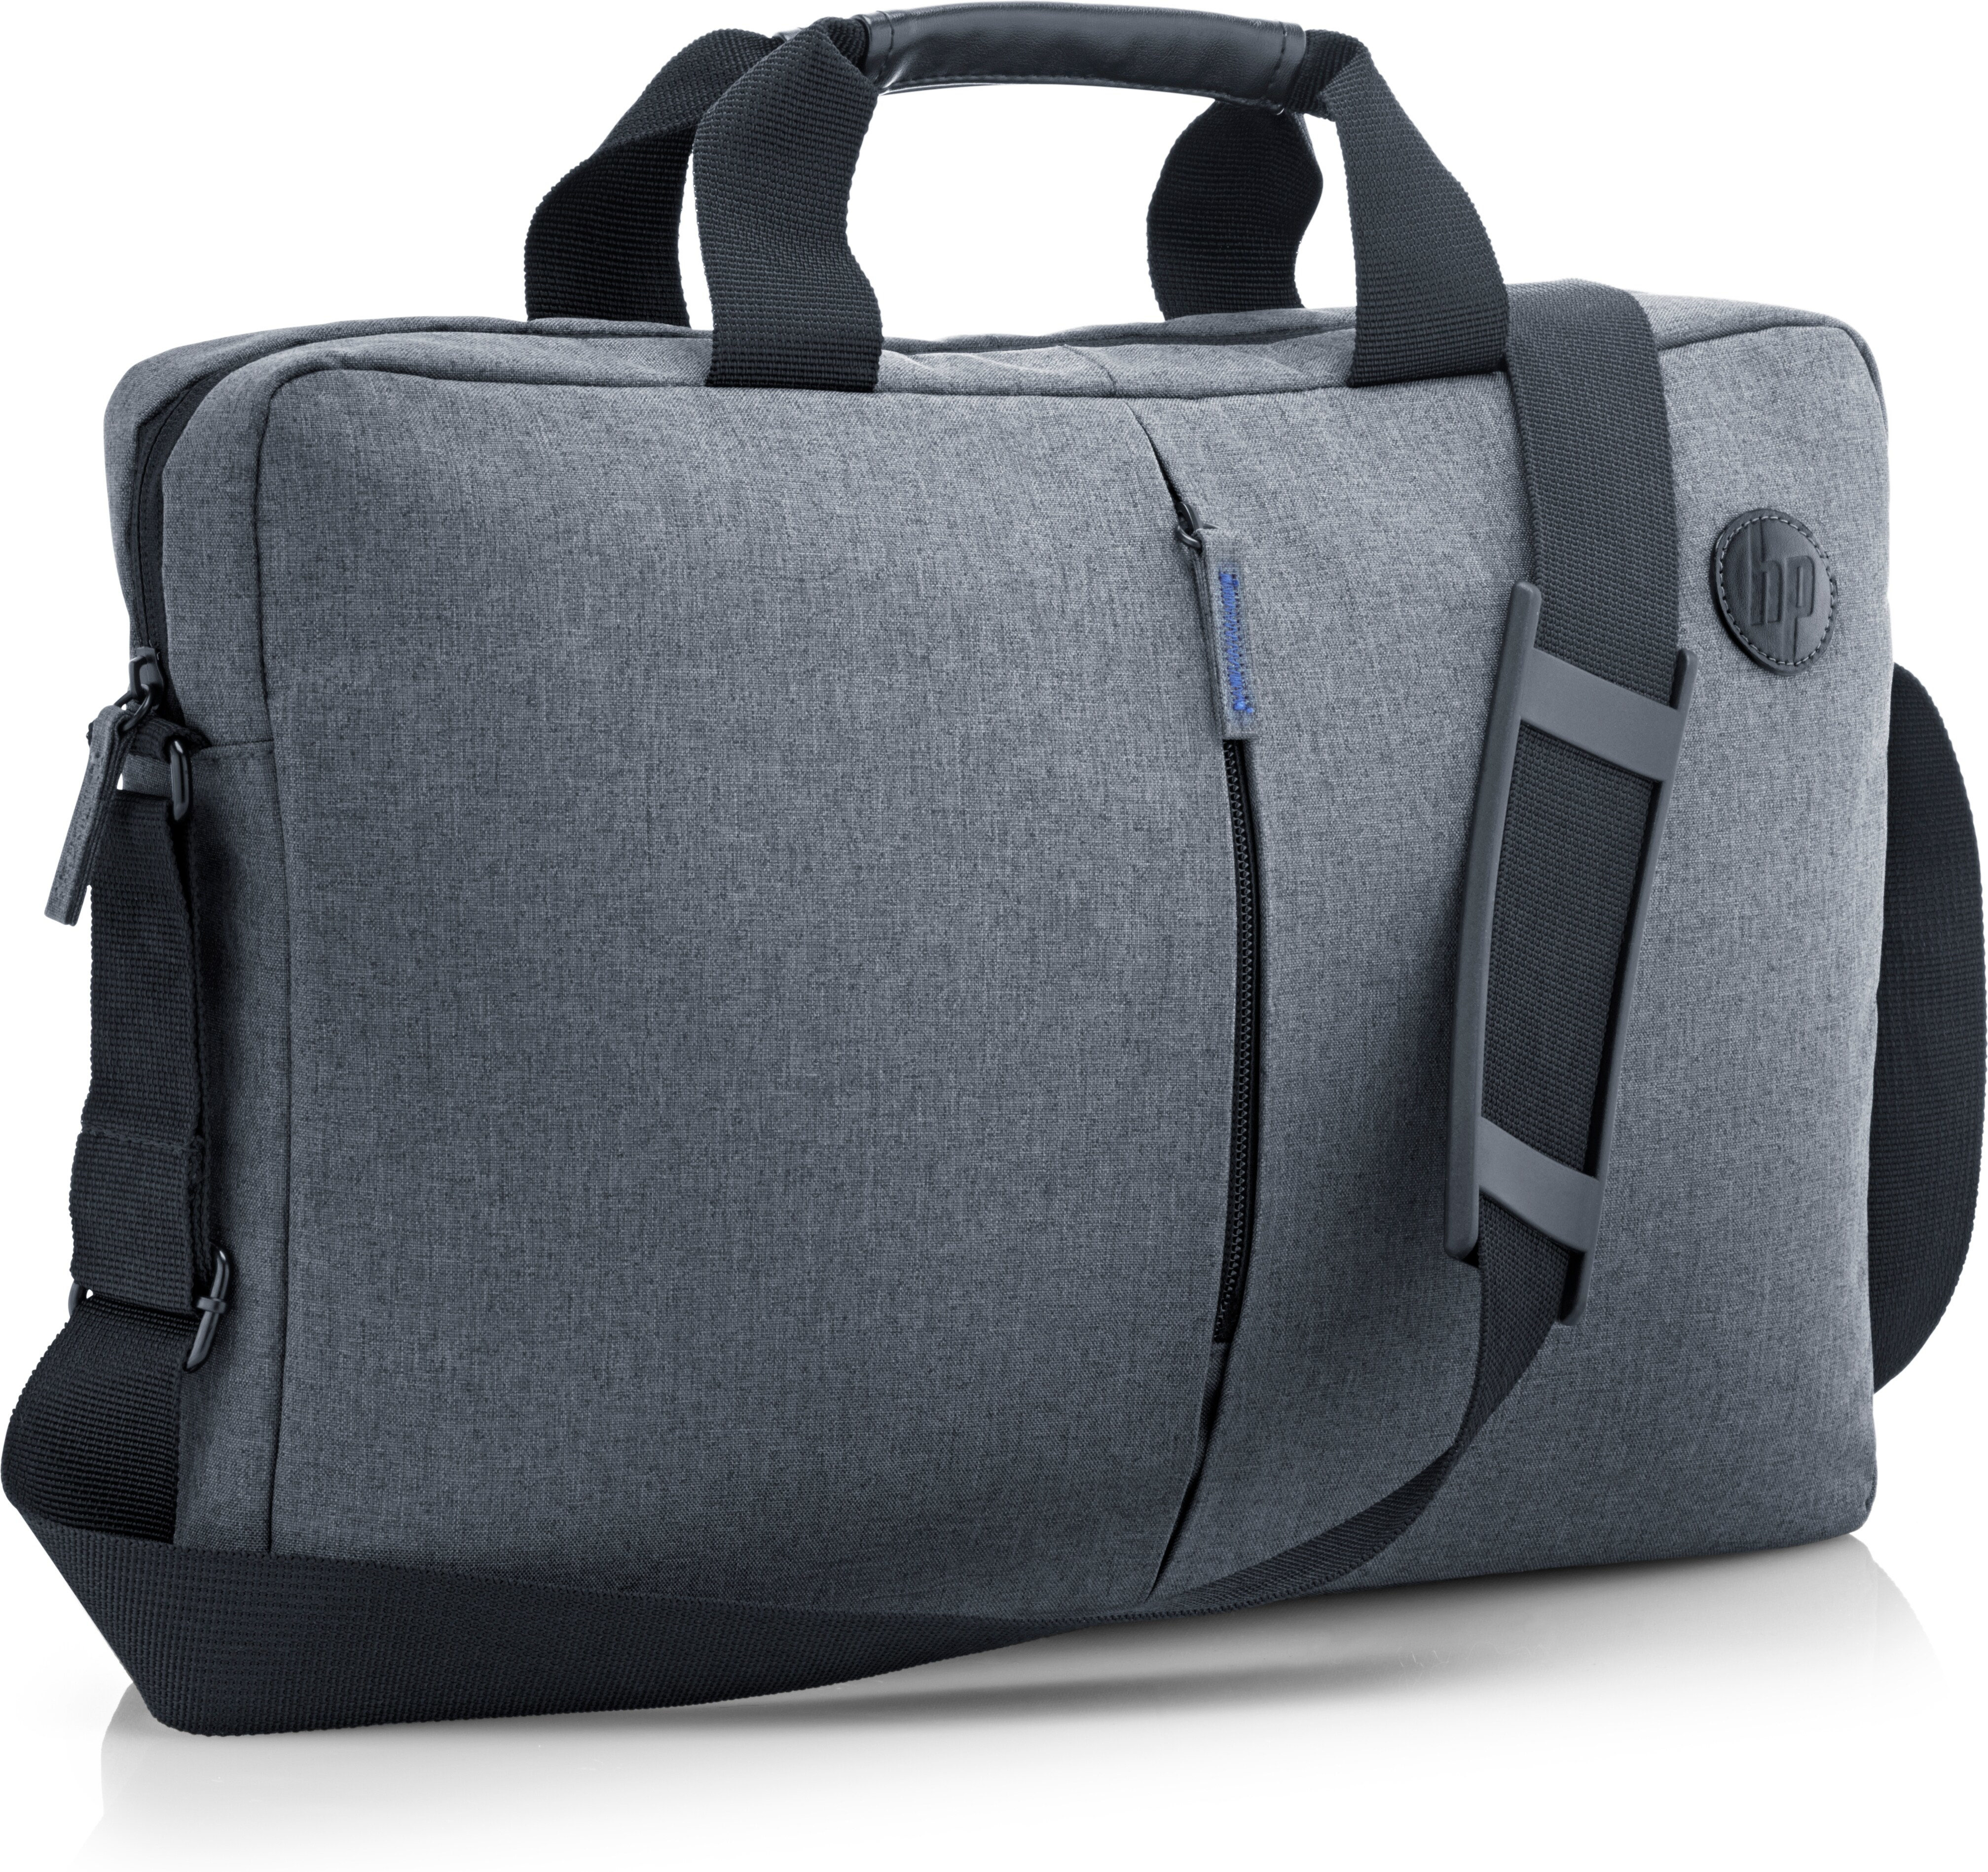 HP Value Topload Case Grey 15.6-Inch